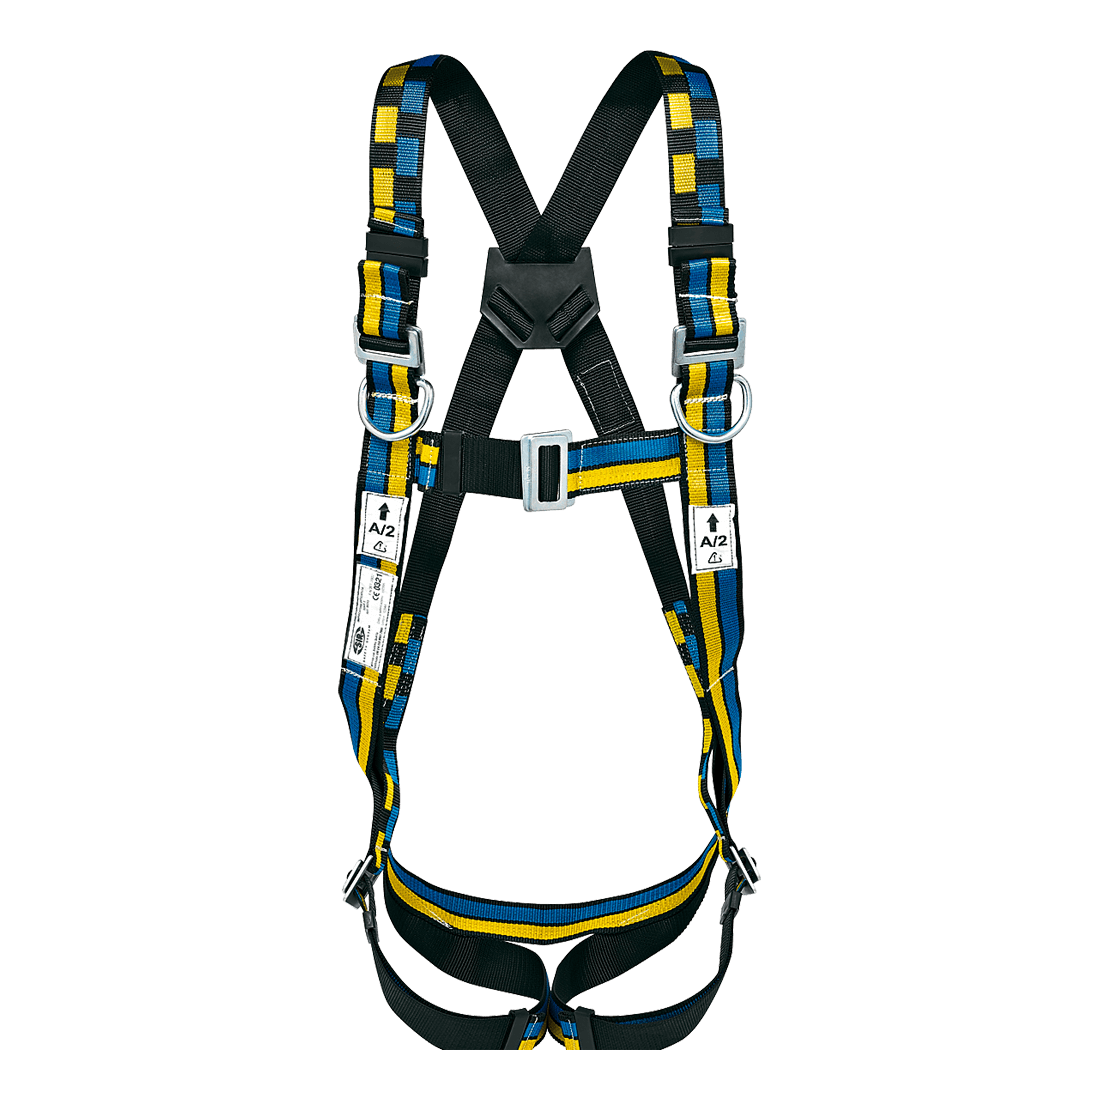 SOKOI 3 SAFETY HARNESS